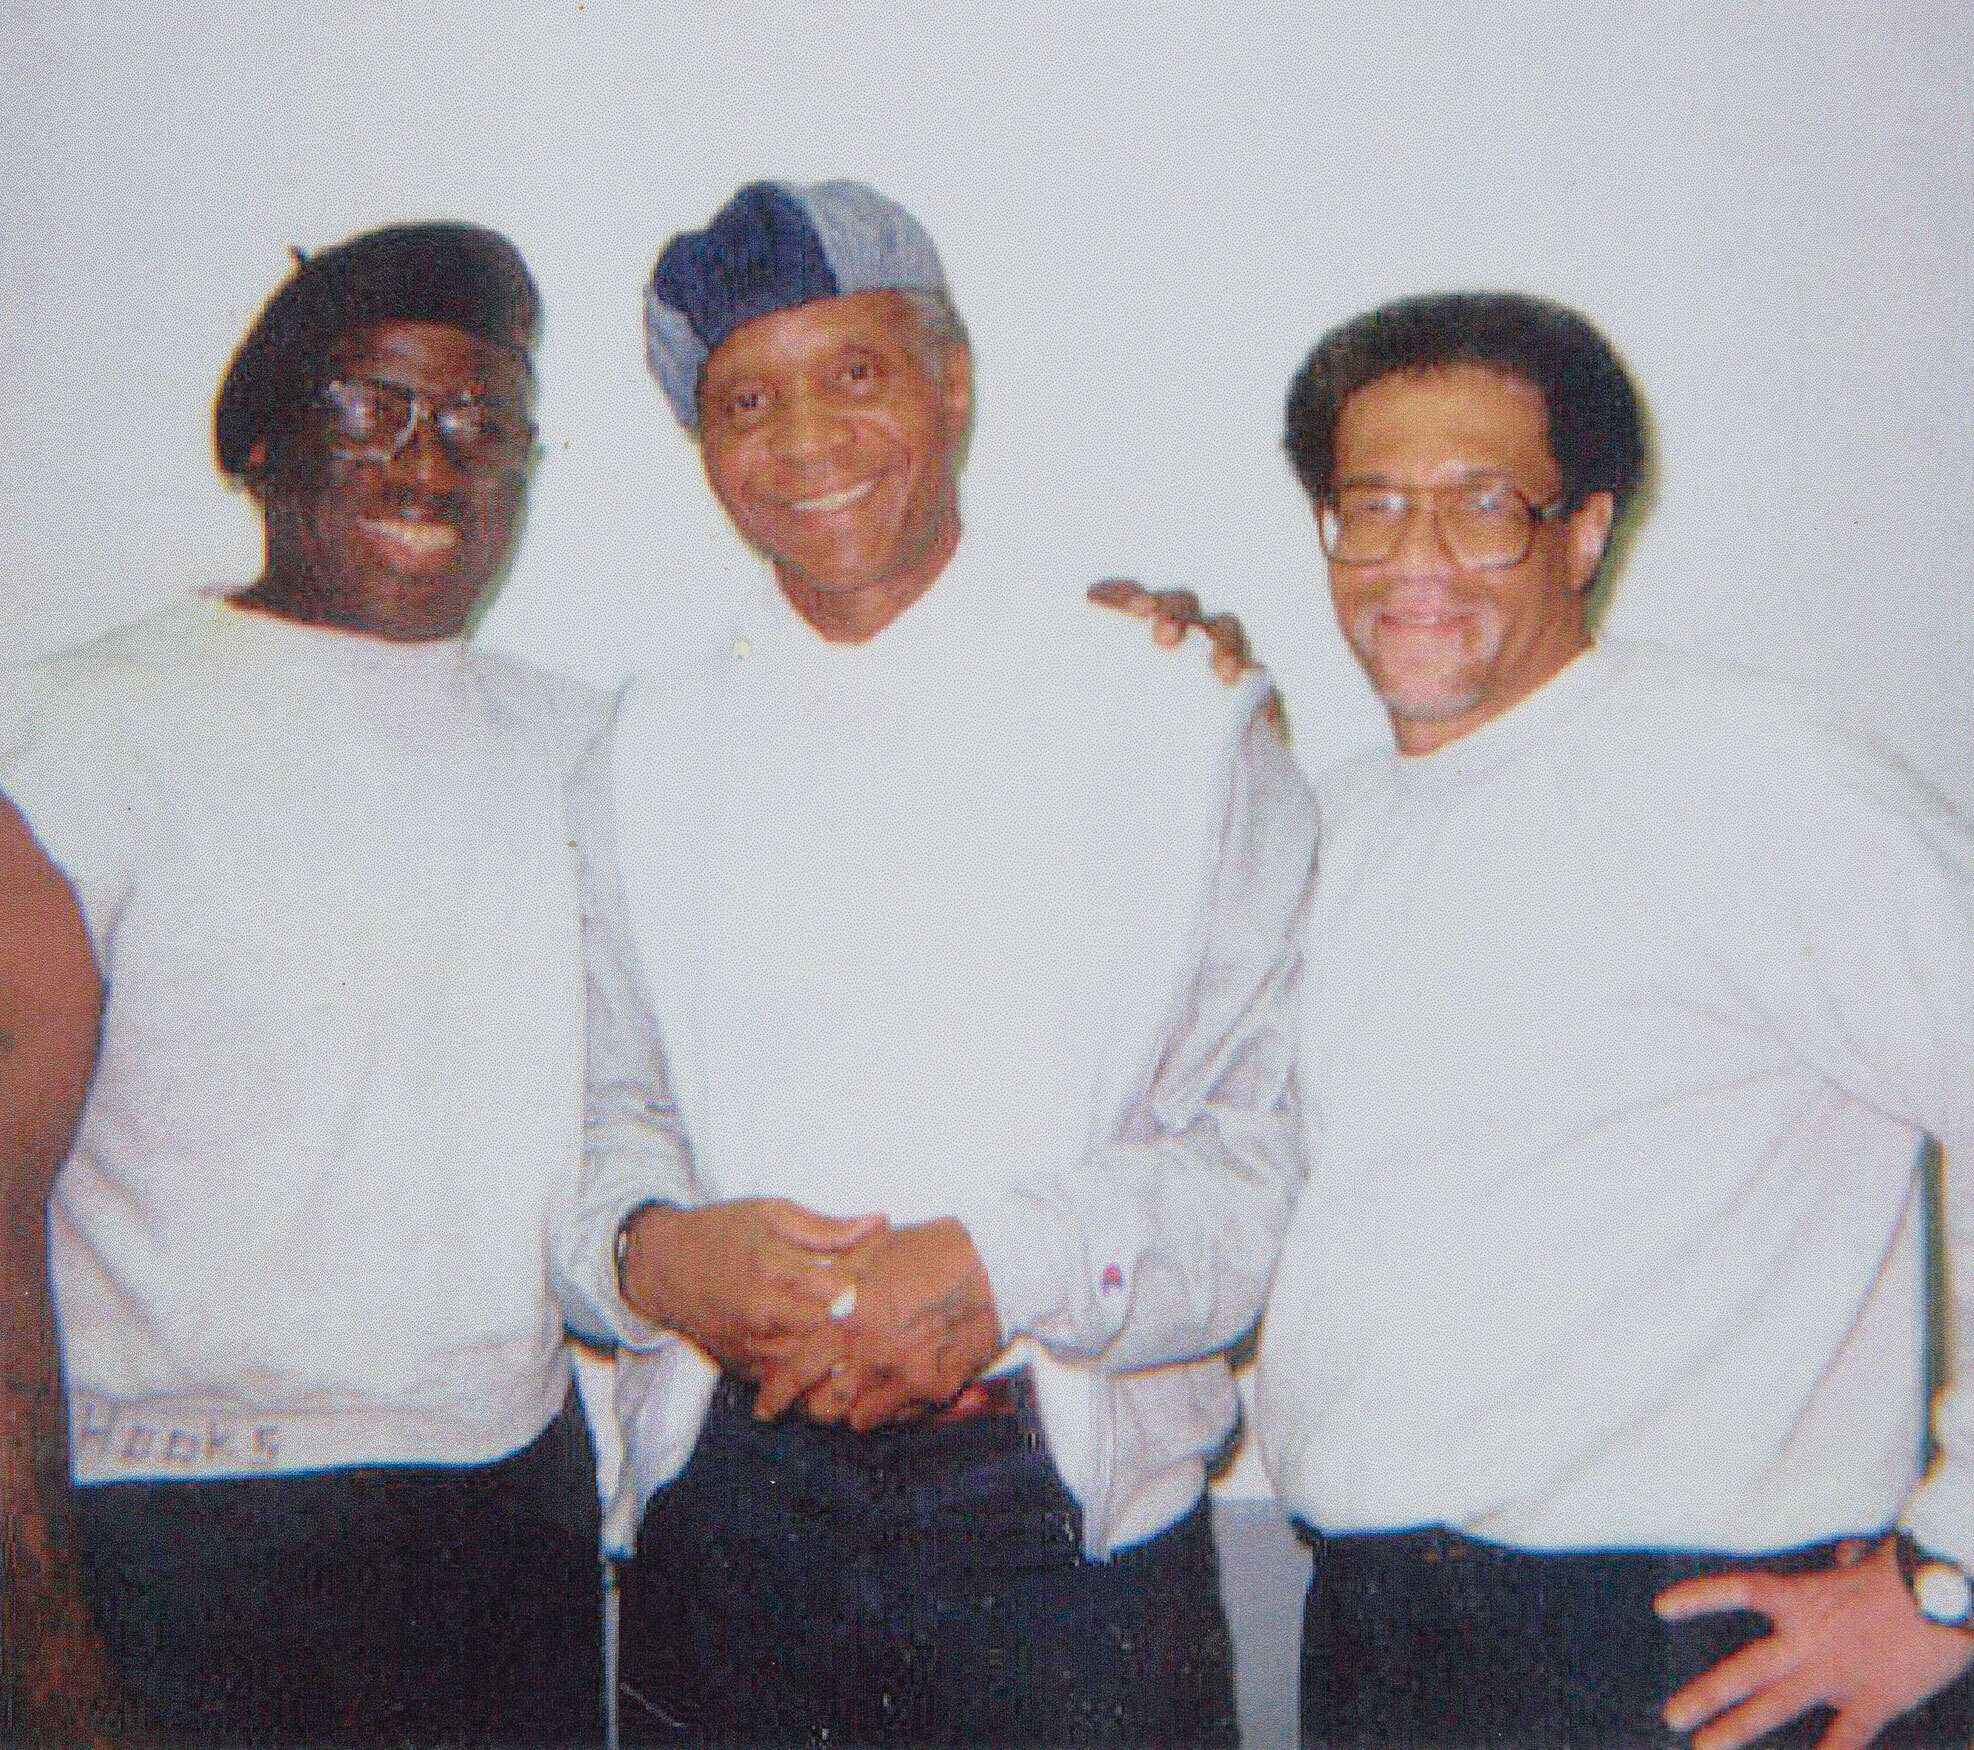 A photo of Herman Wallace, Robert King, and Albert Woodfox standing with each other, smiling, looking at the camera.